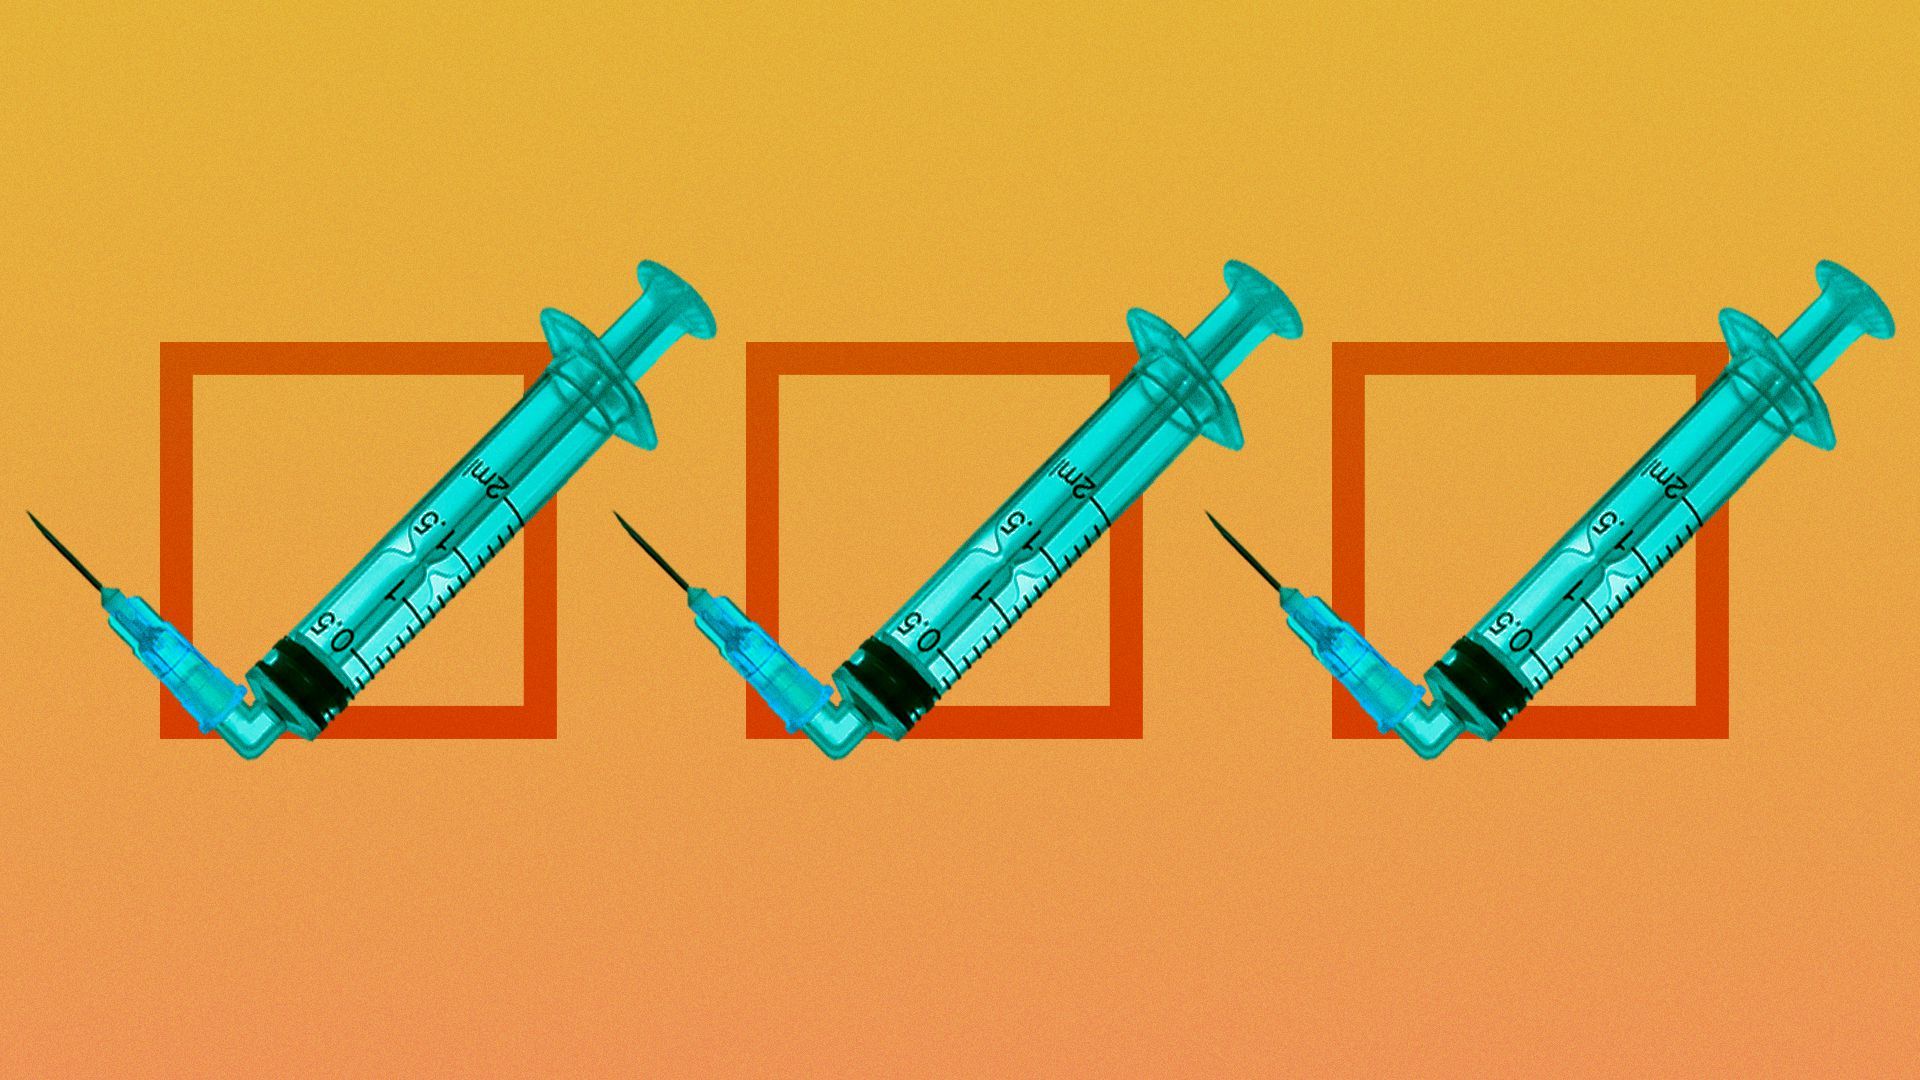 Illustration of three boxes that have a checkmark made of a syringe.